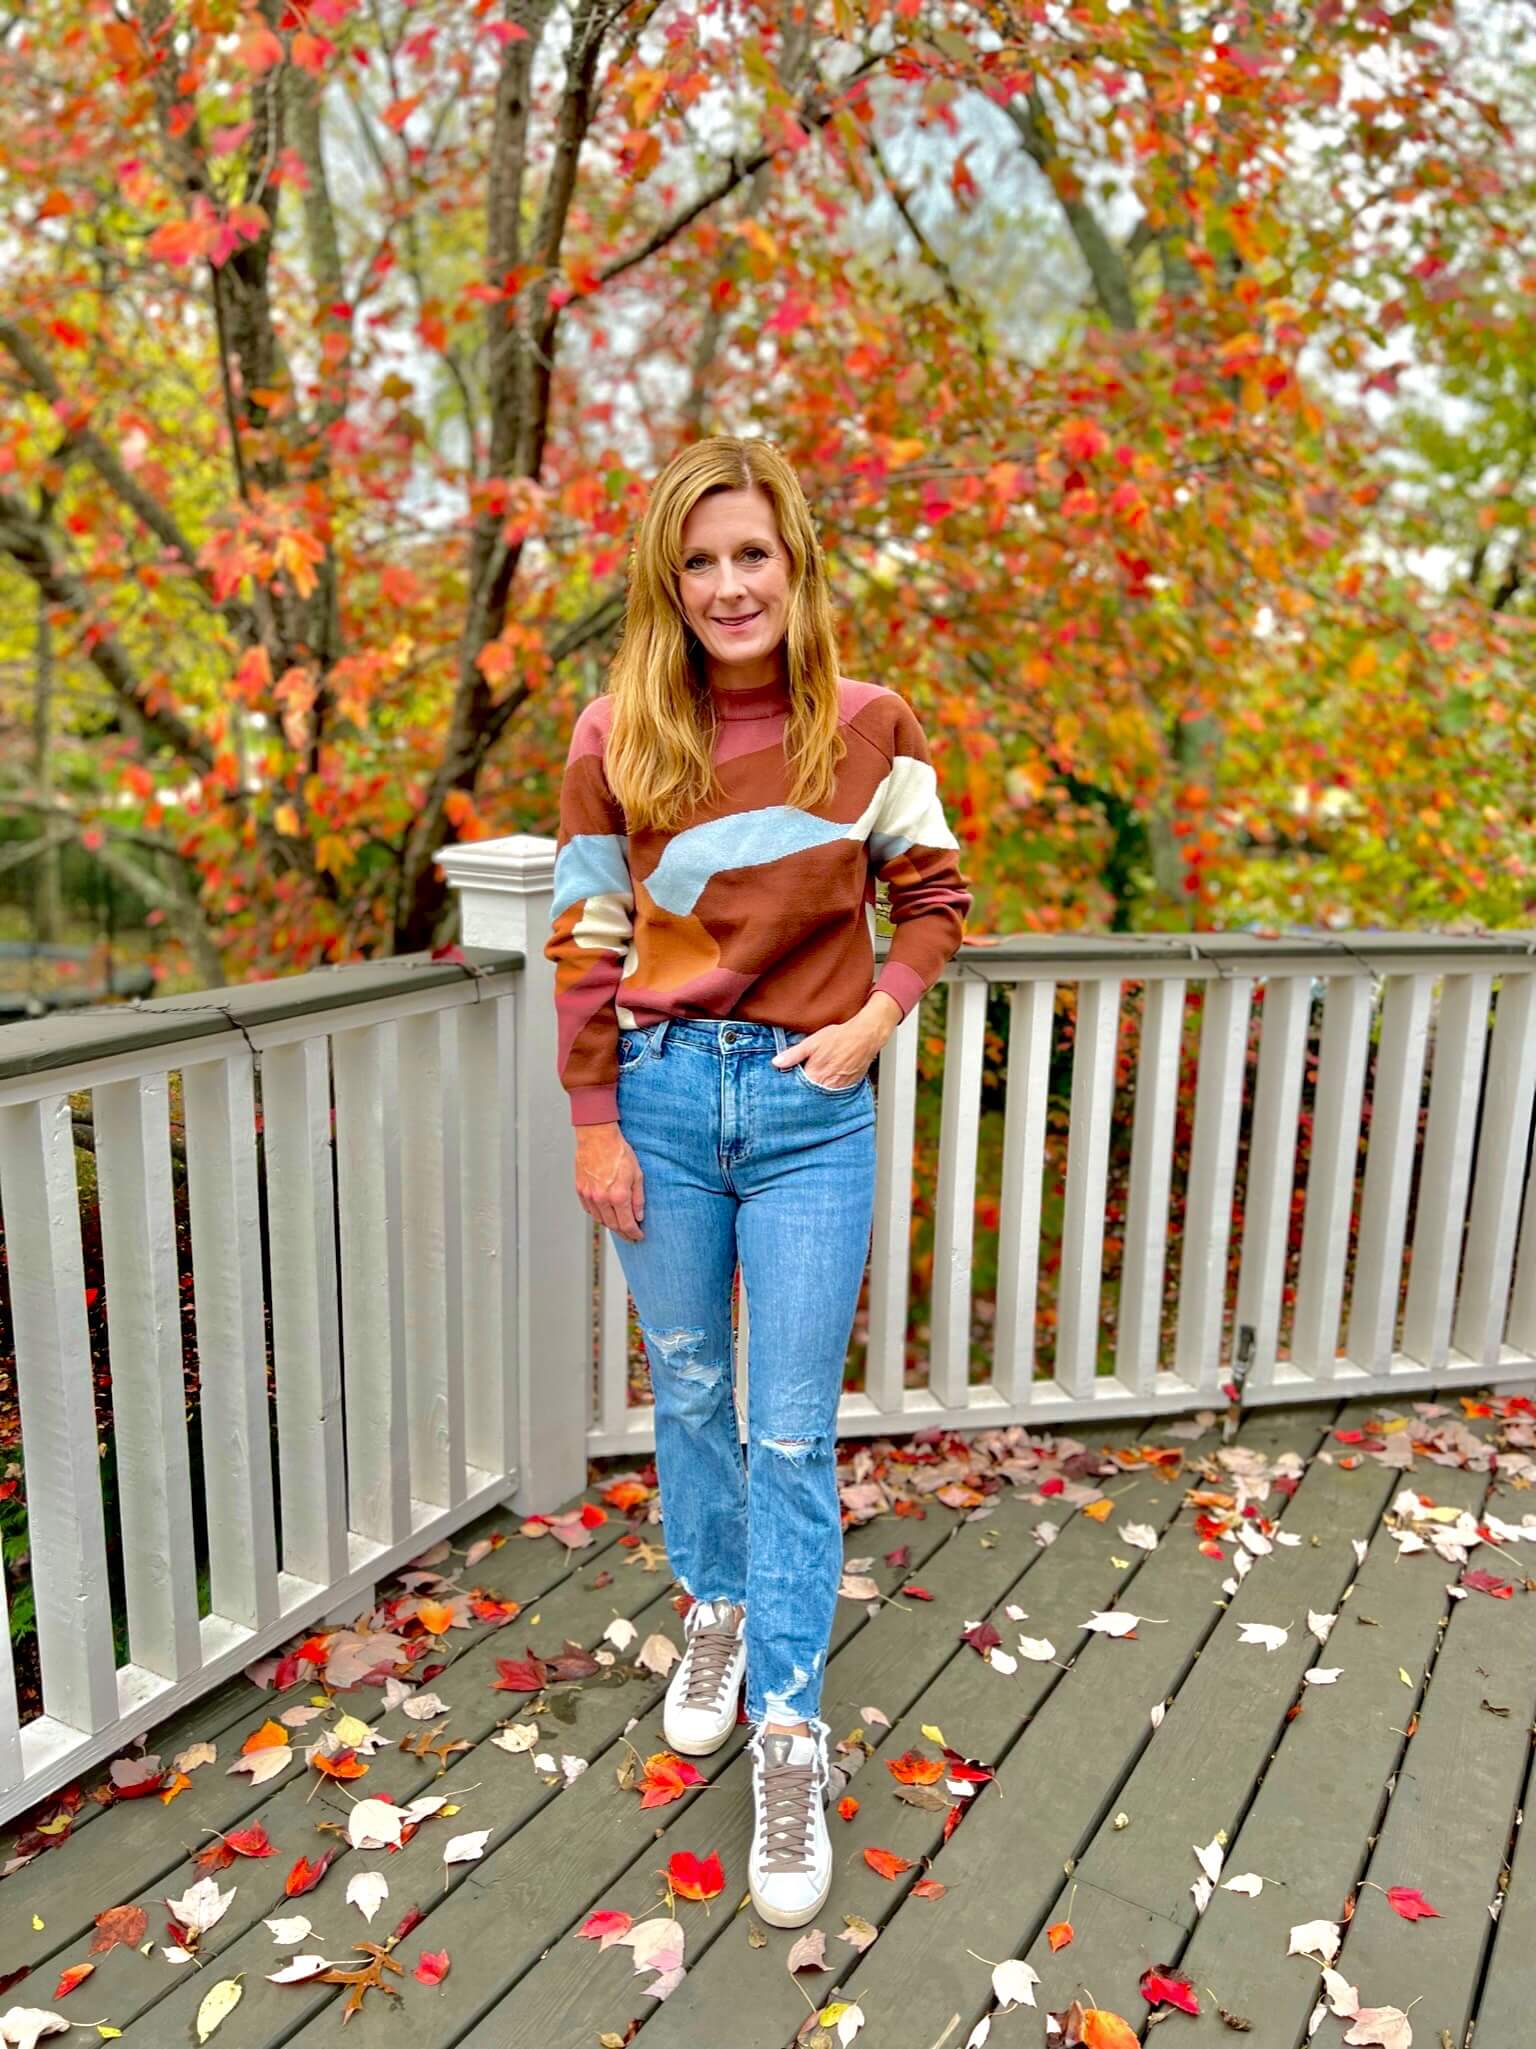 sweater and distressed jeans and sneakers how to wear distressed jeans with a dressy sweater how to wear a fall sweater beautiful fall sweater high quality fall sweater how to wear sneakers with jeans how to wear sneakers with straight leg jeans what to wear to the pumpkin patch what to wear to a fall festival